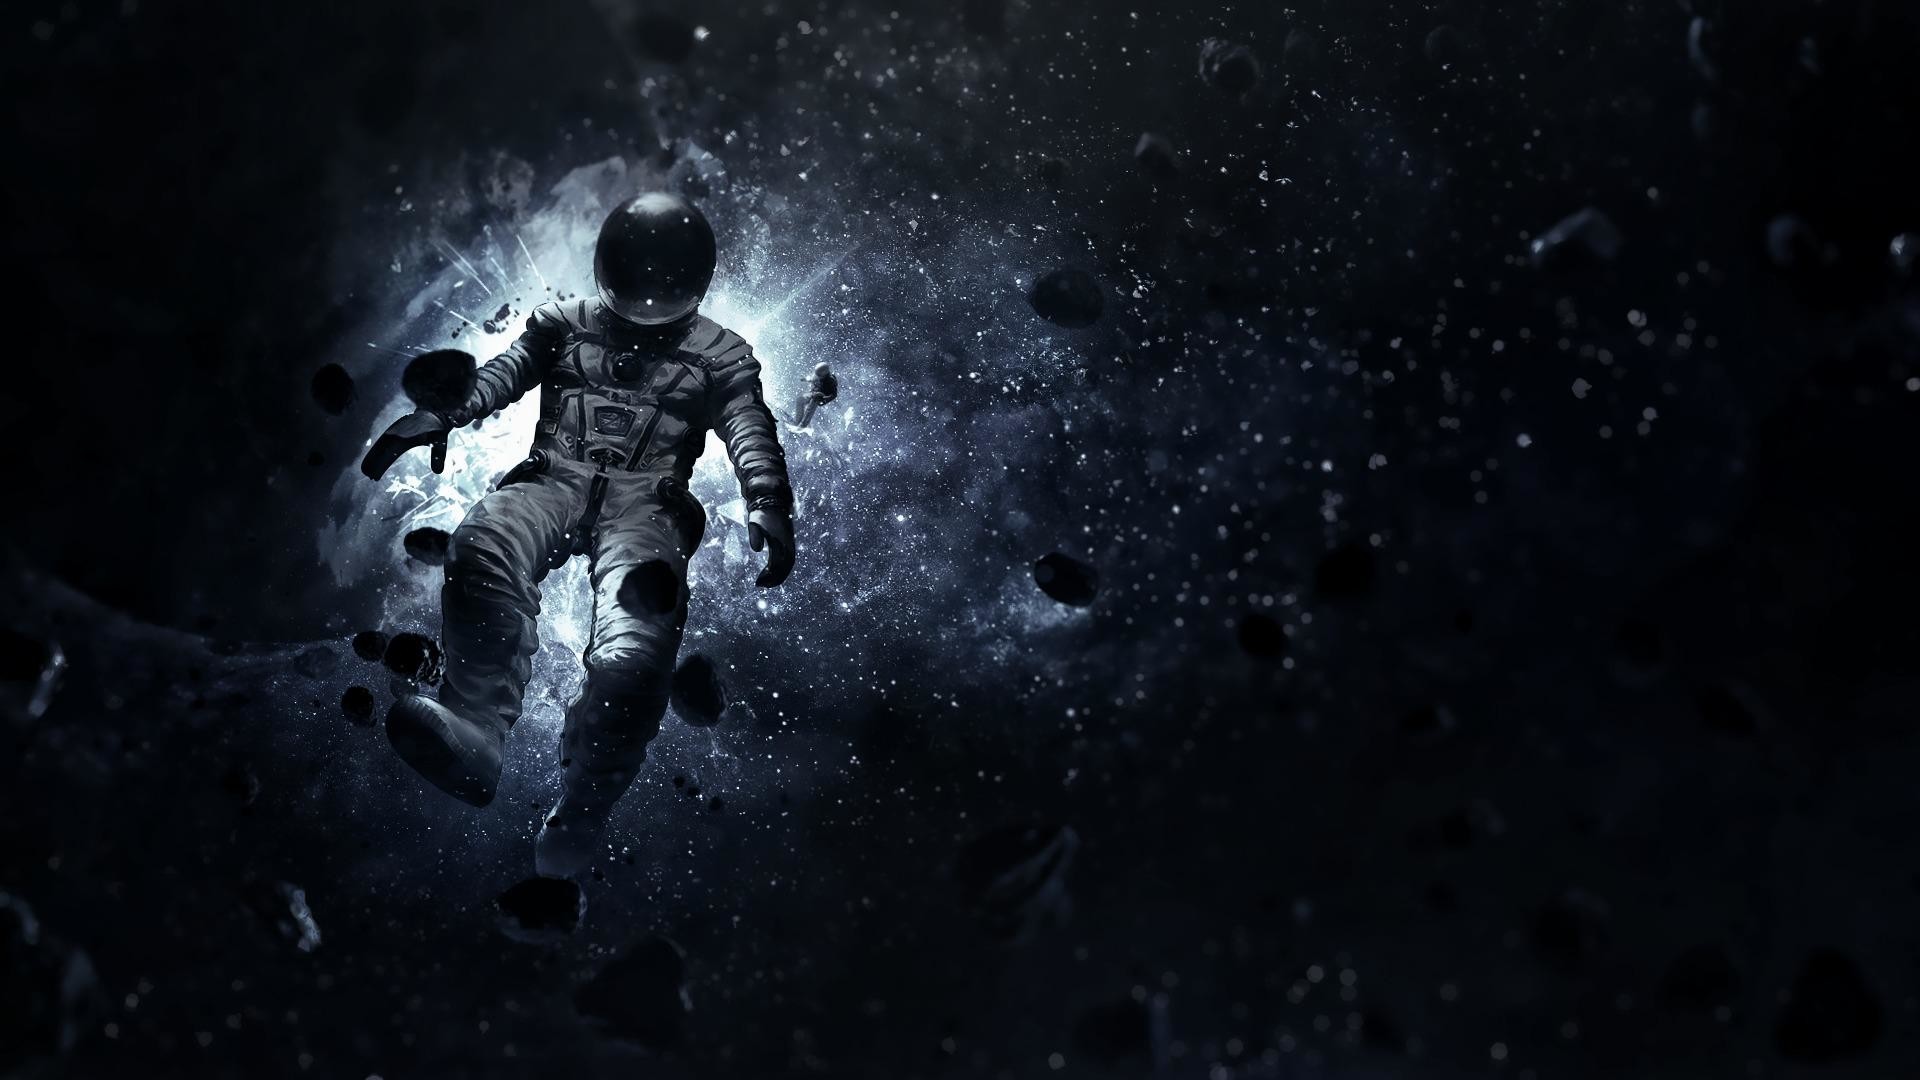 1920x1080 wallpaper.wiki-Download-Astronaut-Picture-Free-PIC-WPD0013898